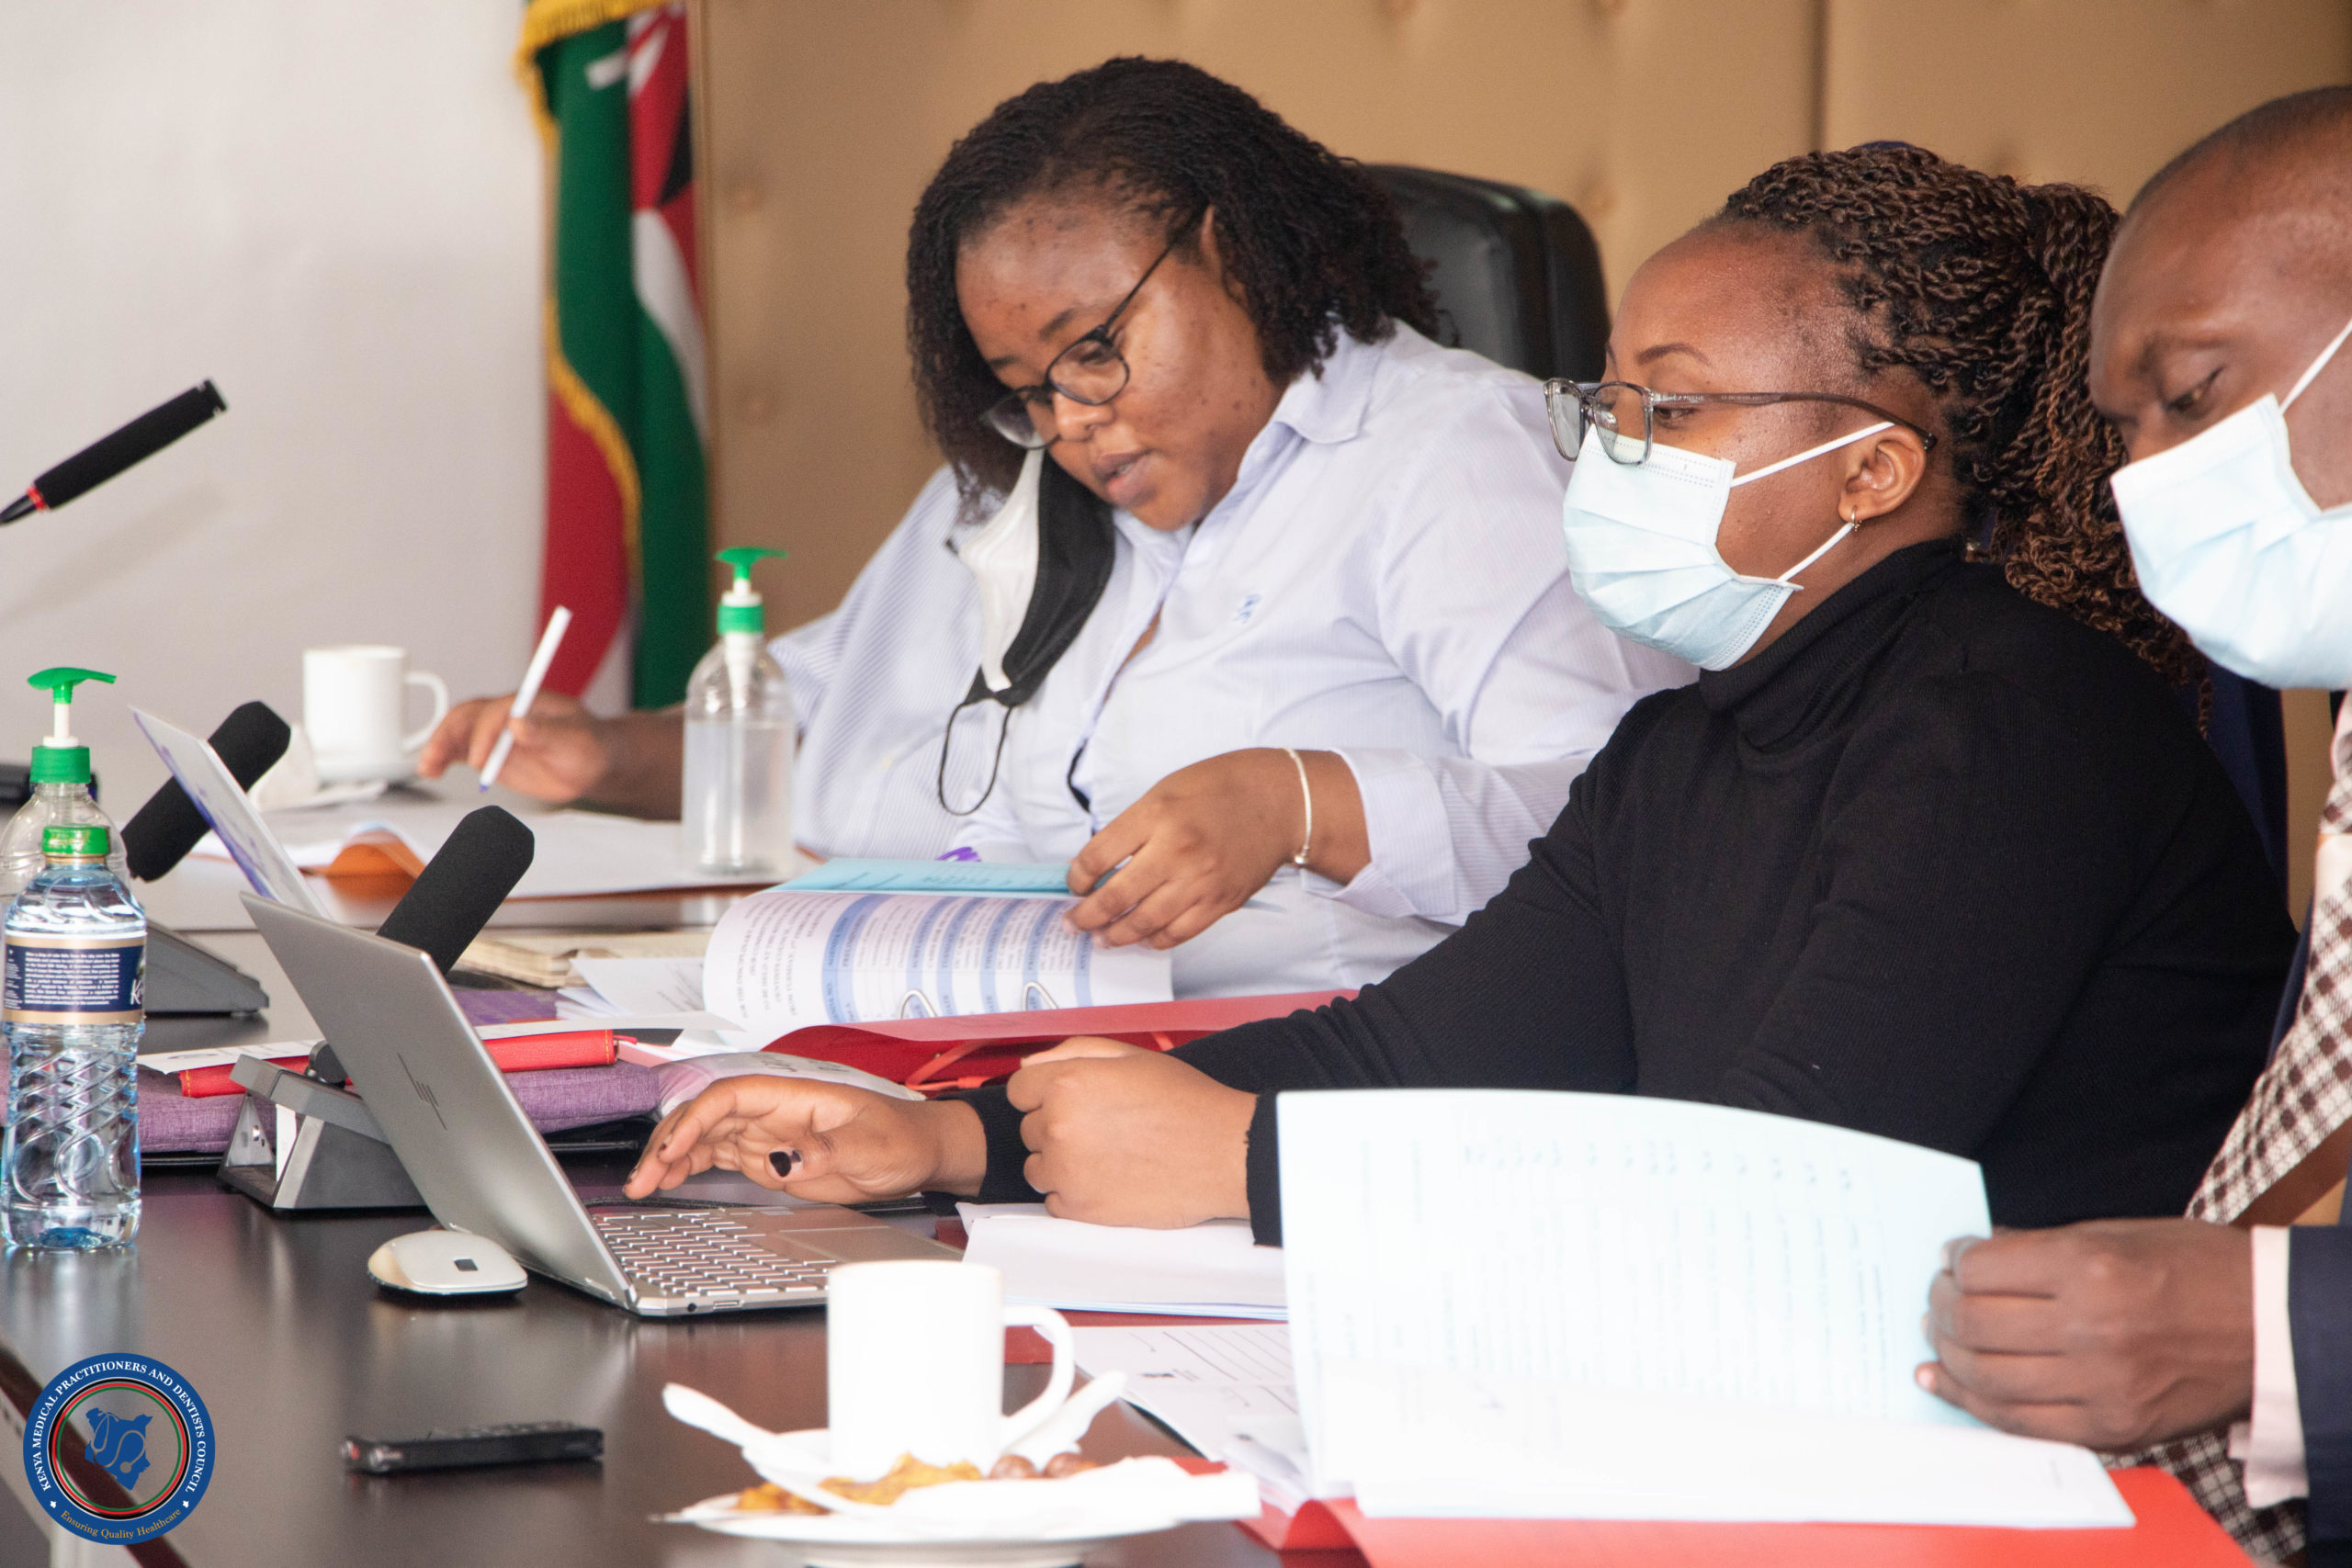 EAC Medical and Dental Boards/Councils conduct inspections in Kenya â€“ Kenya  Medical Practitioners and Dentists Council